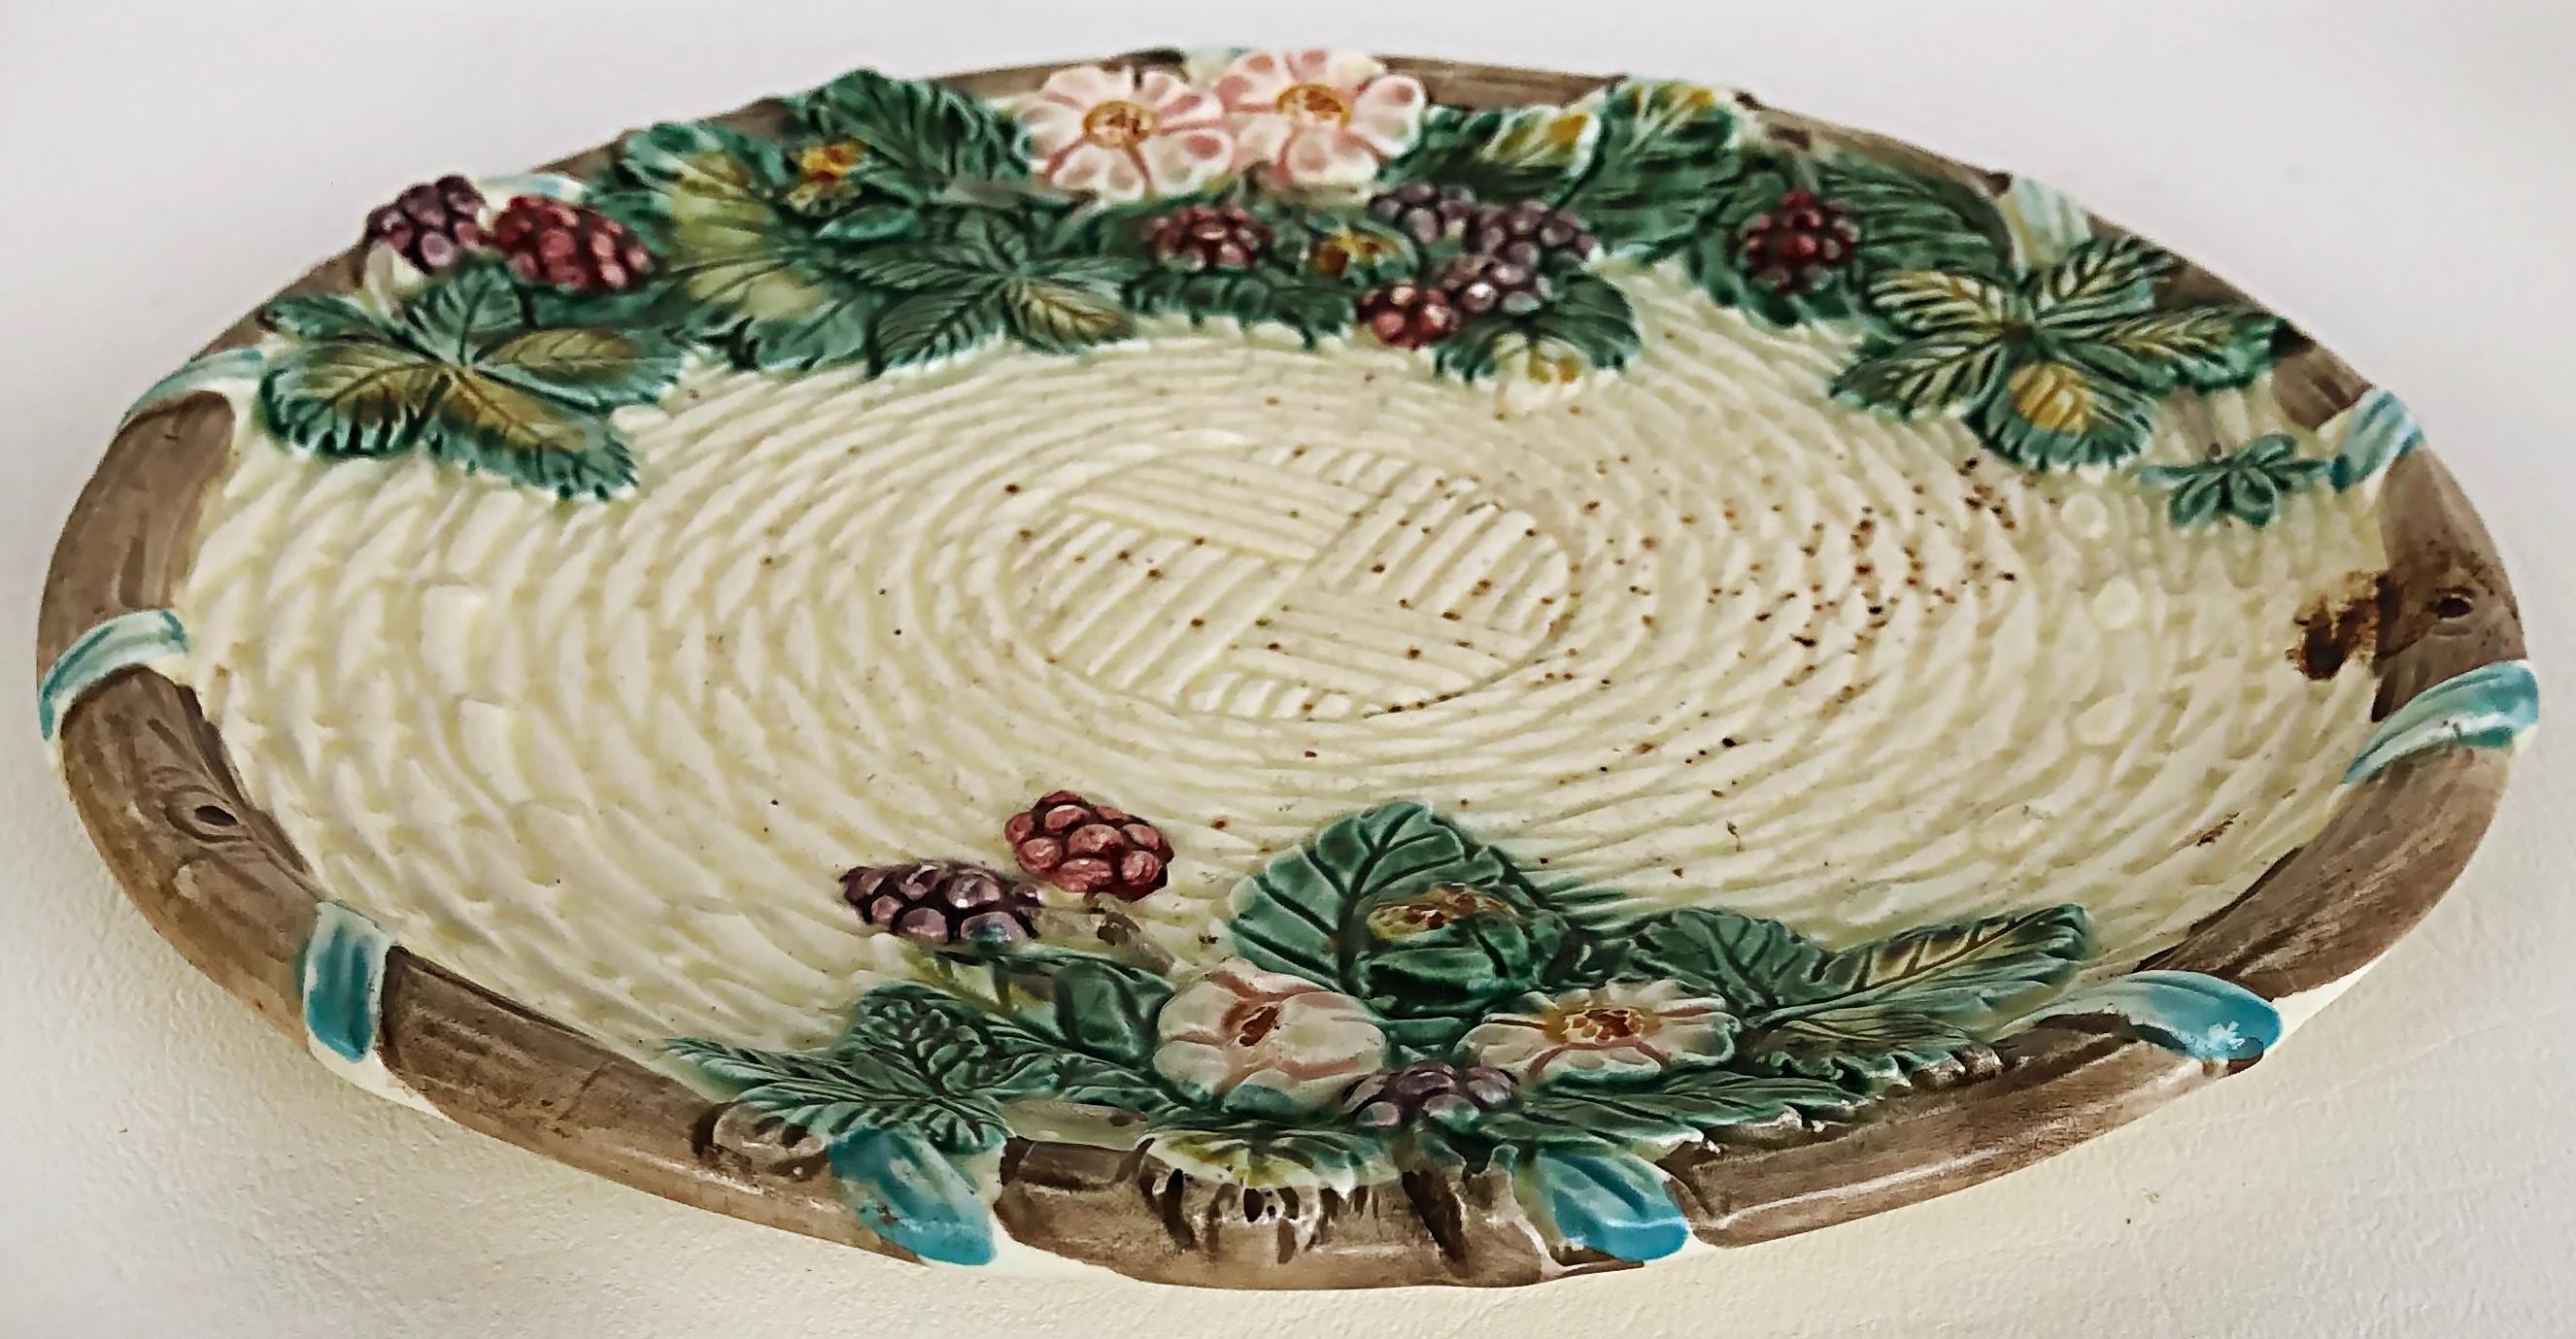 Vintage Majolica Serving Plate with Floral and Leaf Border and Cream Ground, 1988

Offered for sale is a late 20th century Majolica plate with a floral pattern. The plate is marked on the back and dated 1988.